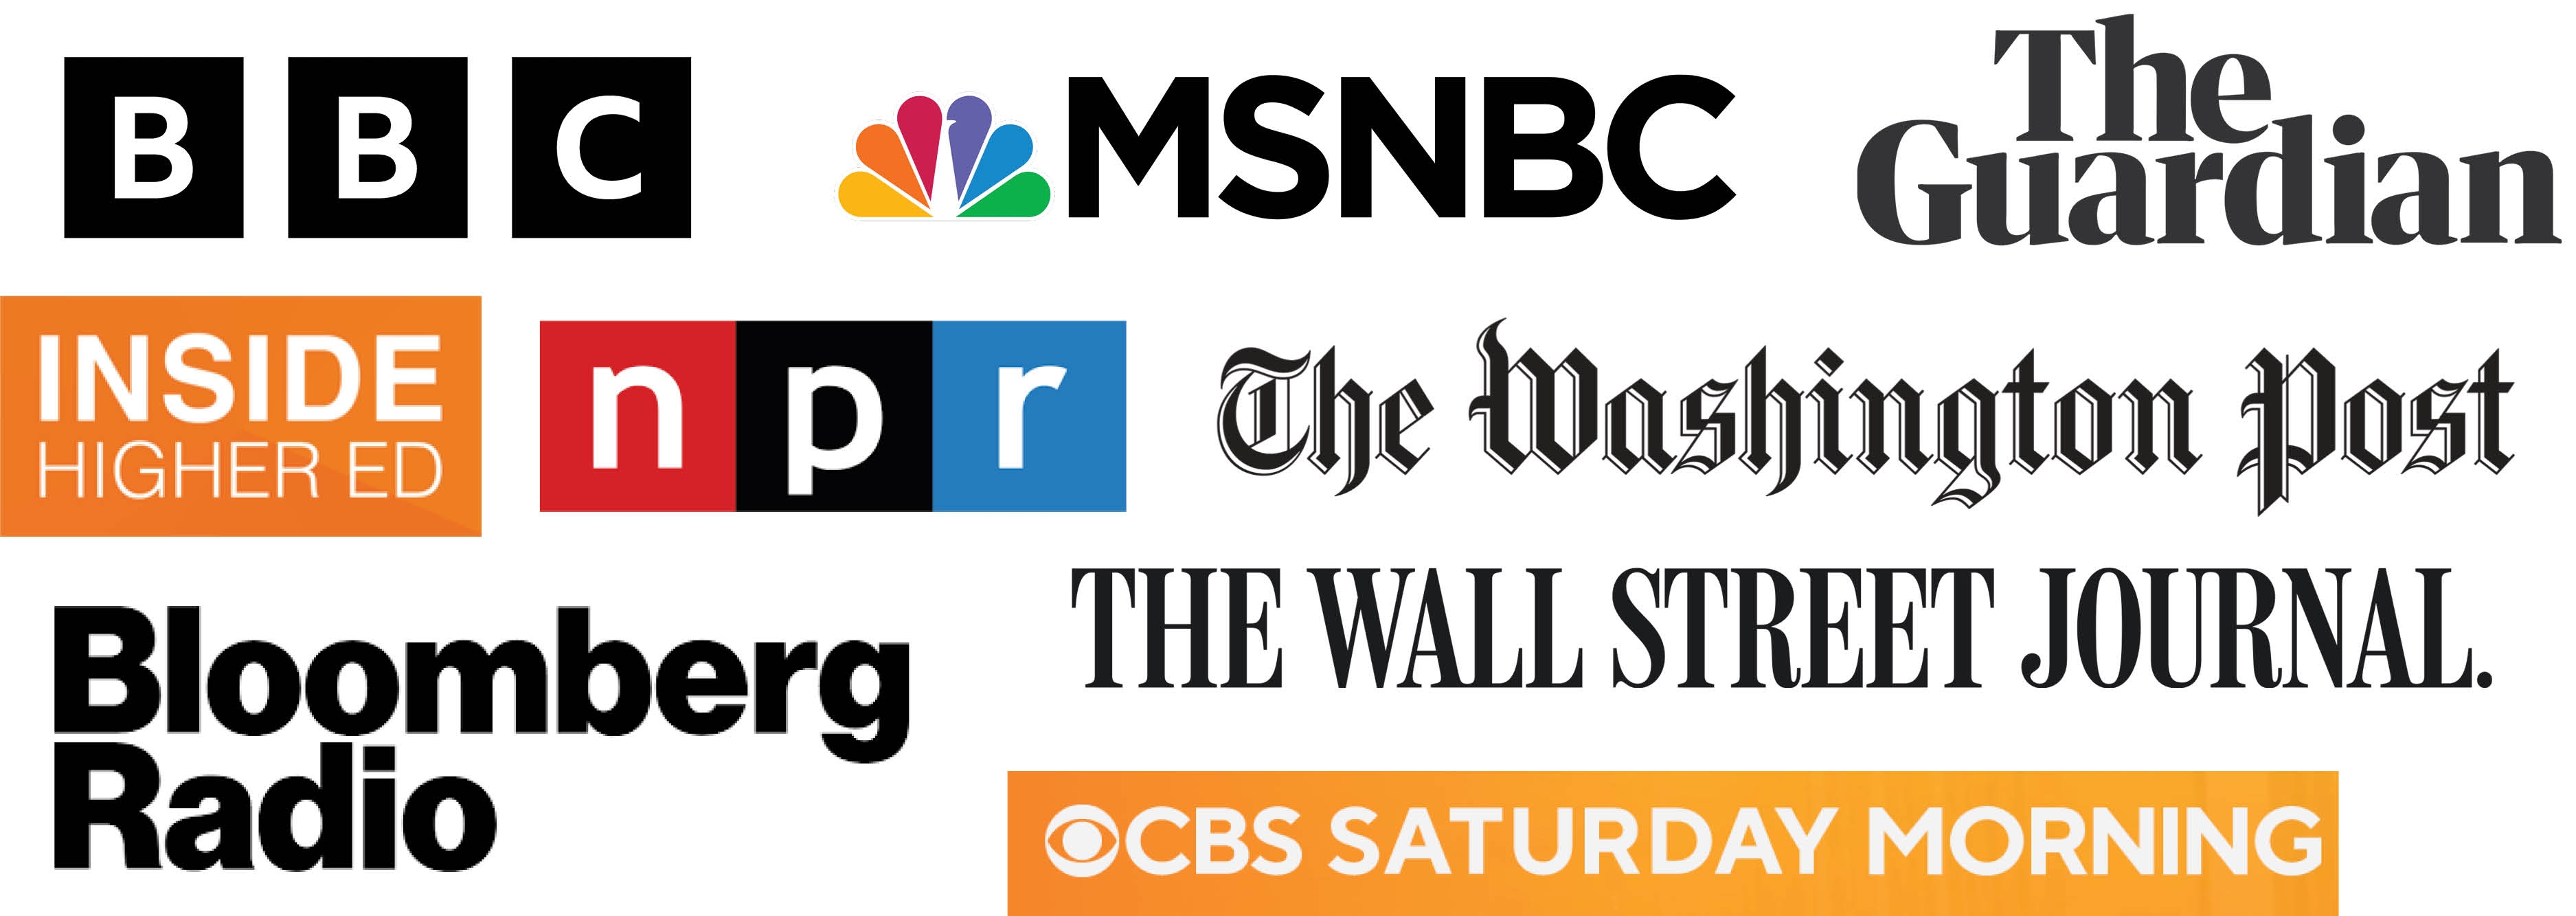 A collage of national media outlet logos, including BBC, MSNBC, The Guardian, Inside High Ed, NPR, The Washington Post, Bloomberg Radio, The Wall Street Journal, and CBS Saturday Morning